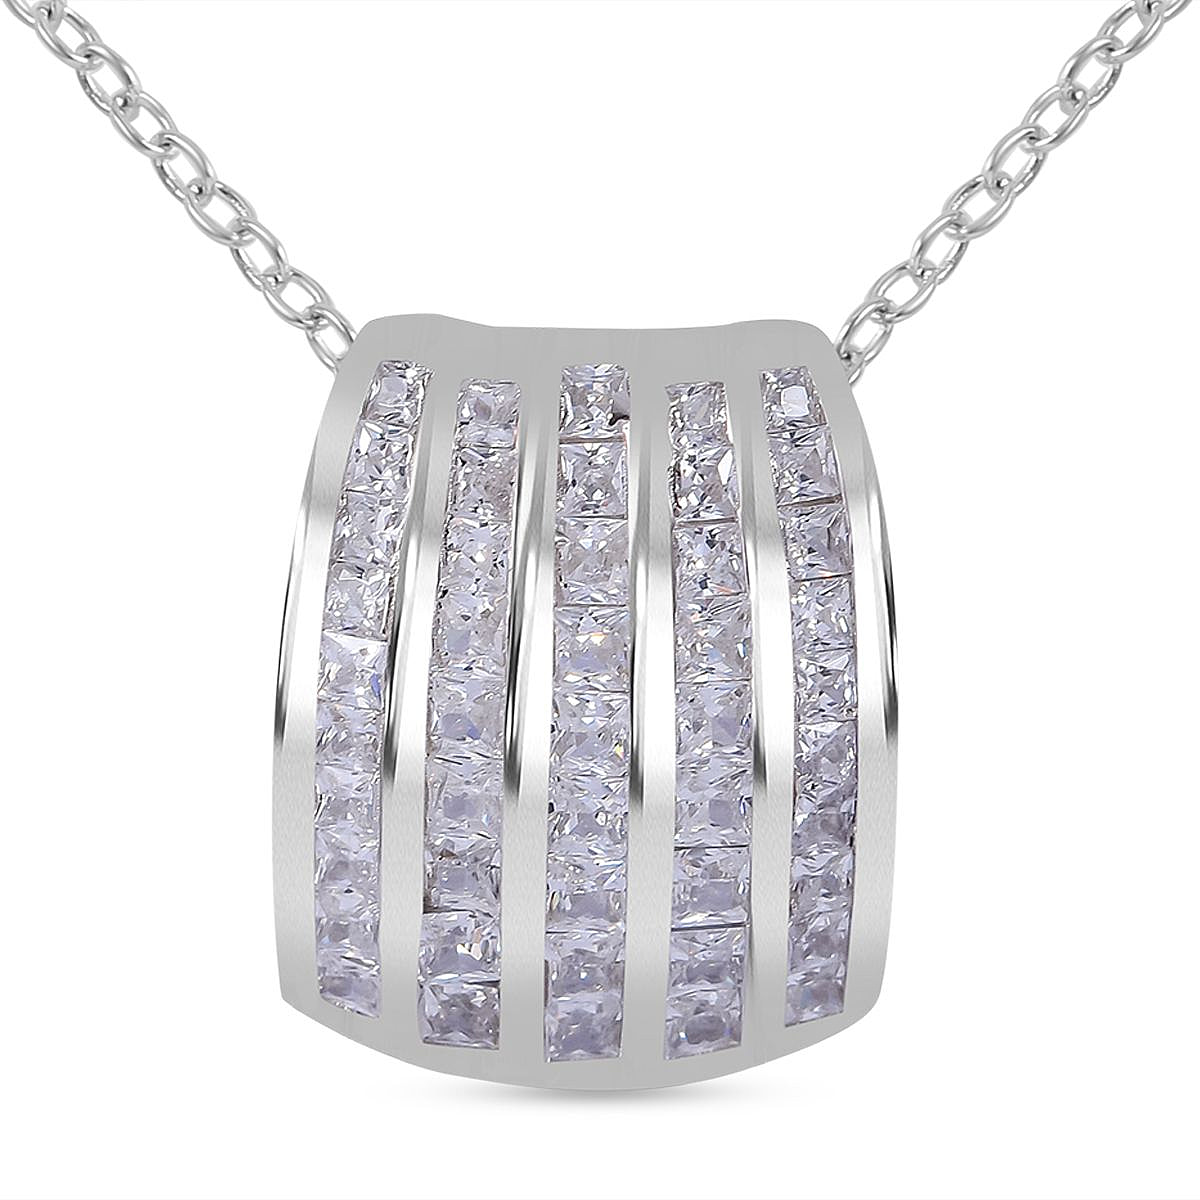 Cubic Zirconia Pendant with Chain (Size 20) in Rhodium Overlay Sterling Silver